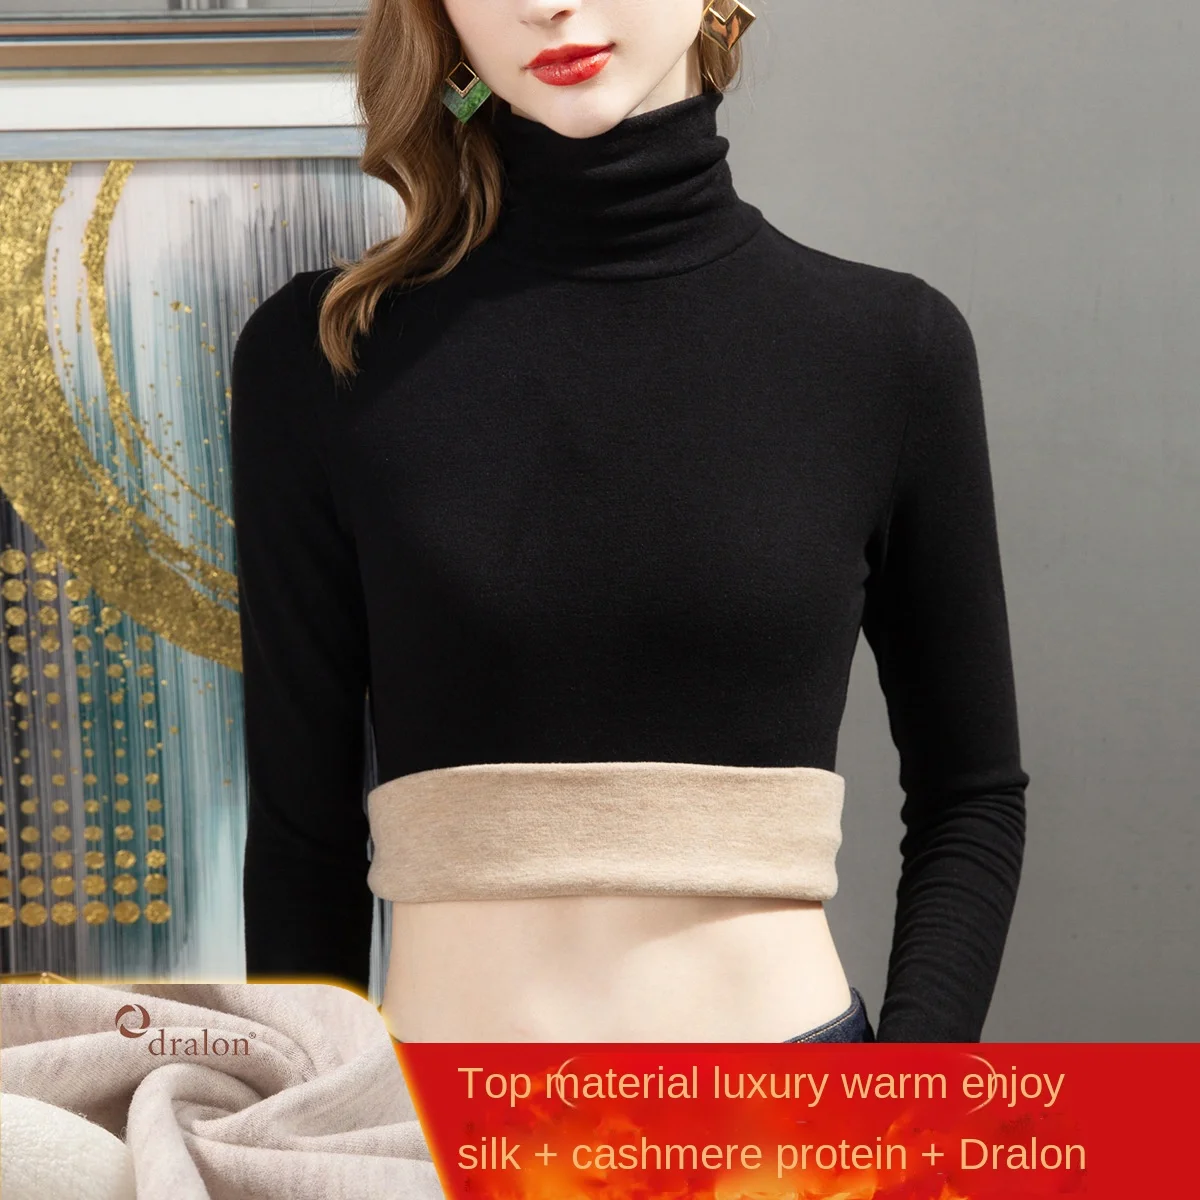 Cashmere Silk Pile Collar Bottoming Shirt Women's Autumn and Winter New Women's Clothing with German Velvet Heating Warm Top